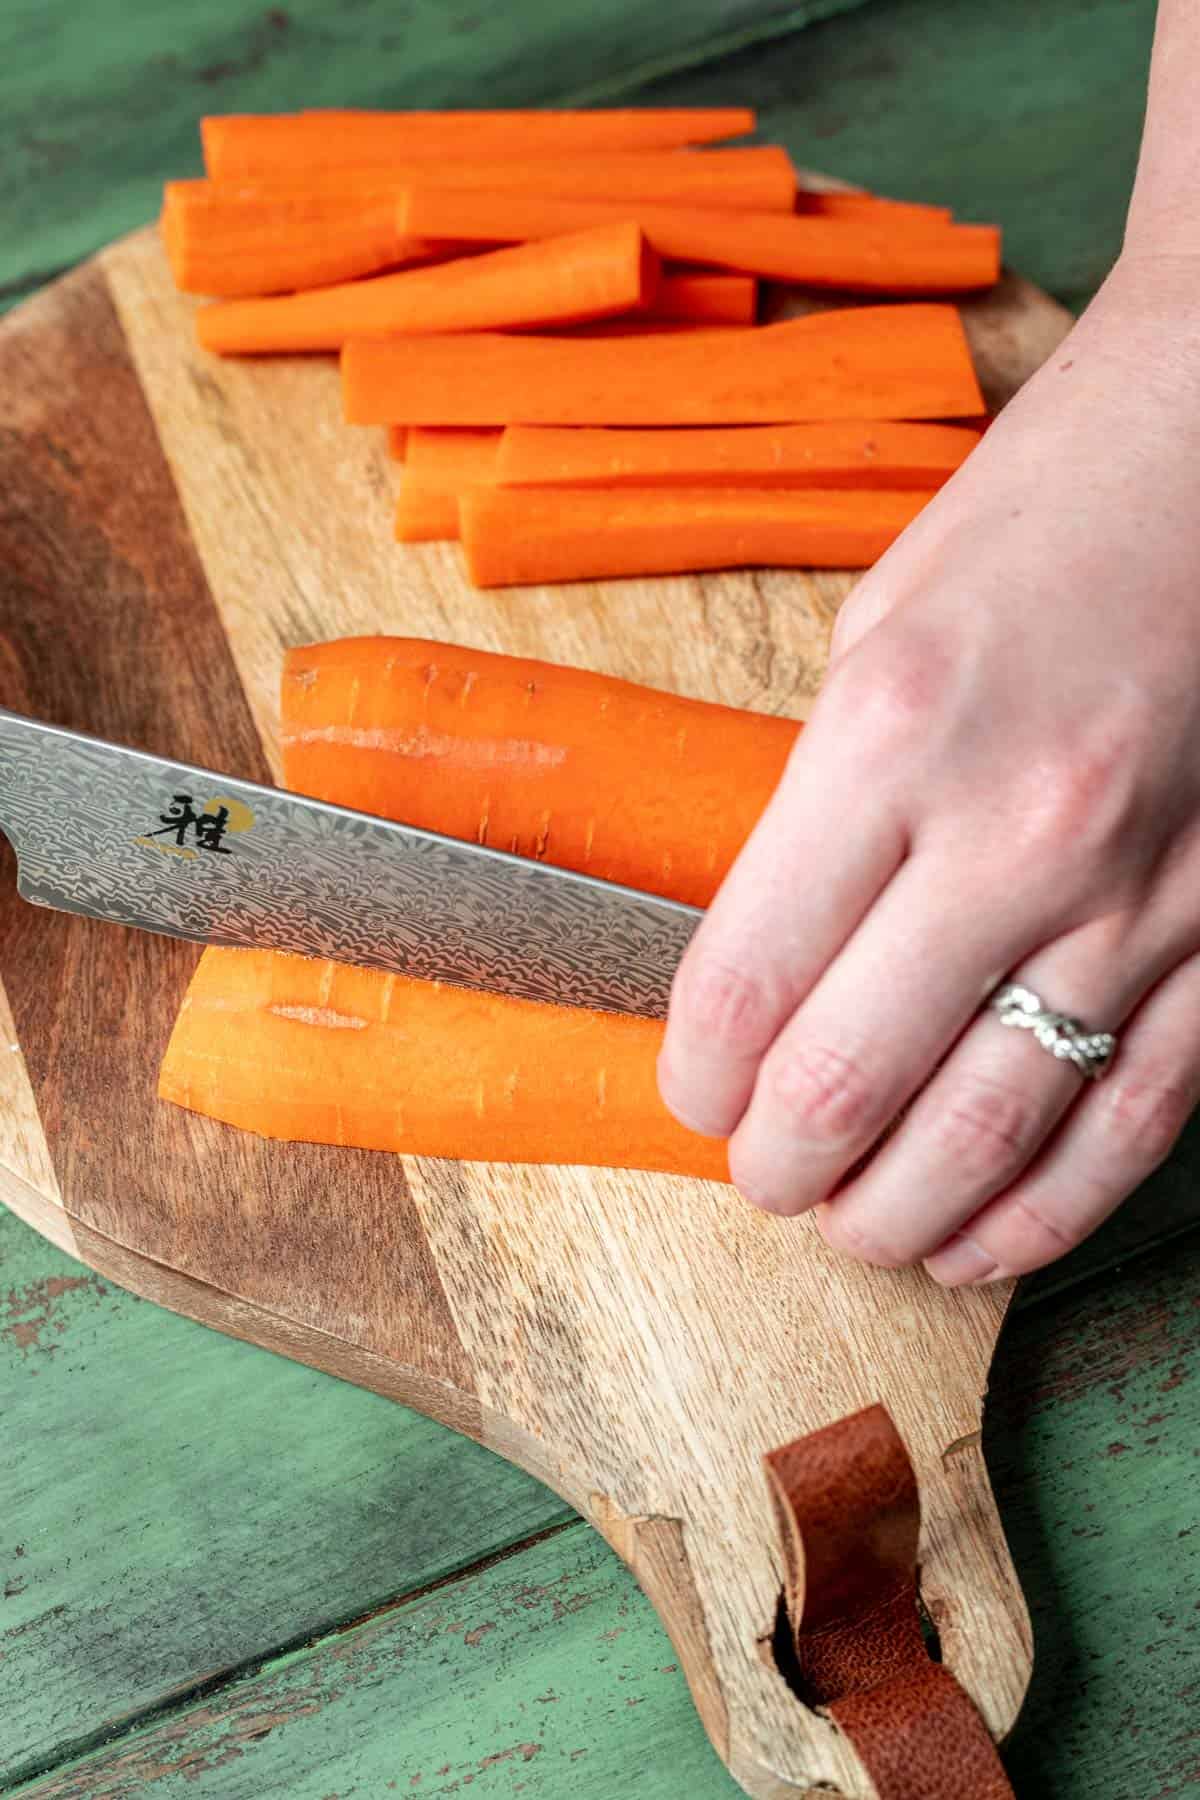 A chef's knife cutting carrots into quarters lengthwise.